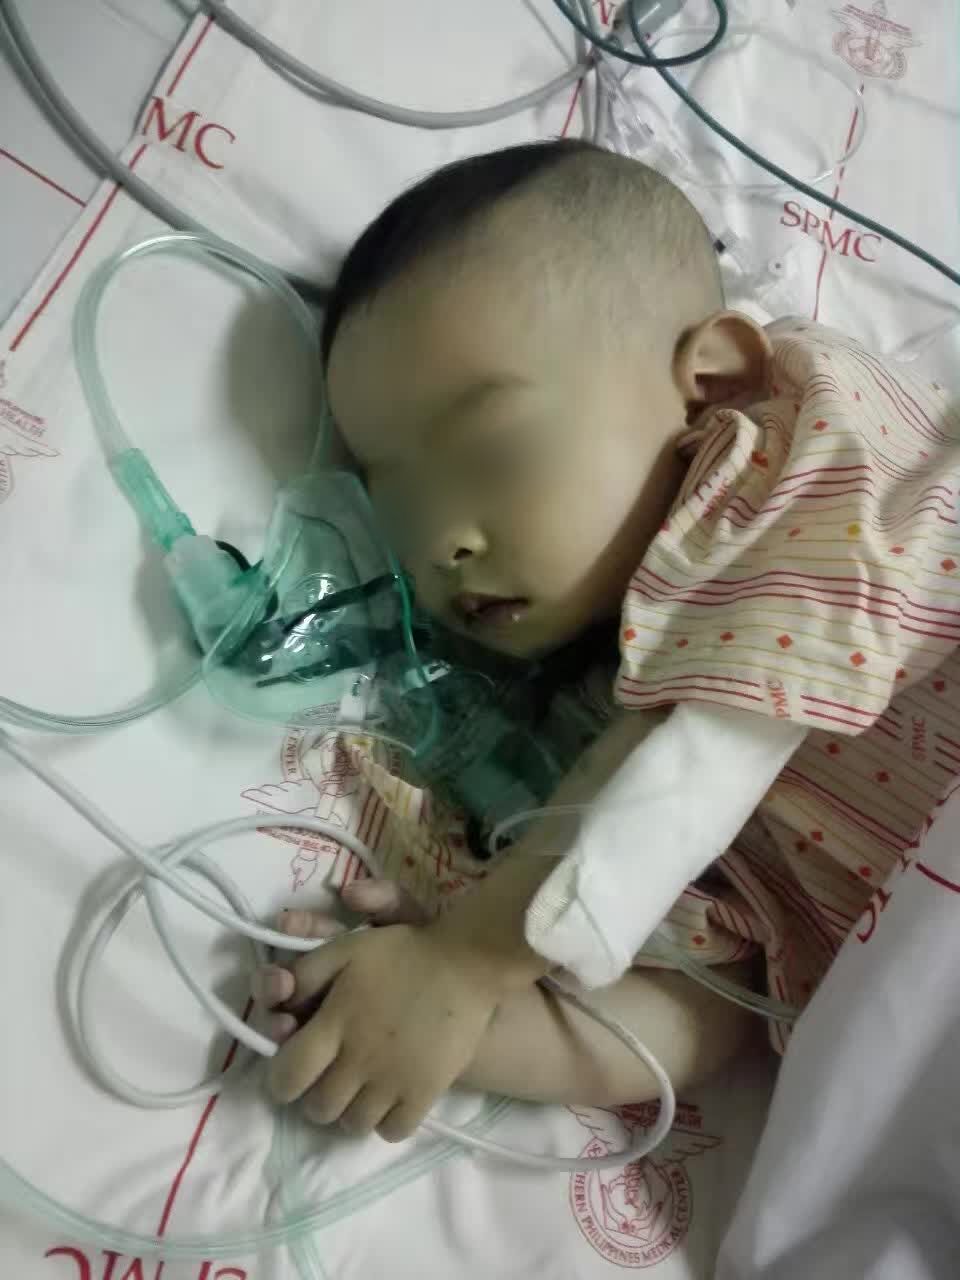 One-year-old Sam Anthony Tan in the ICU after his open-heart surgery in April 2017.